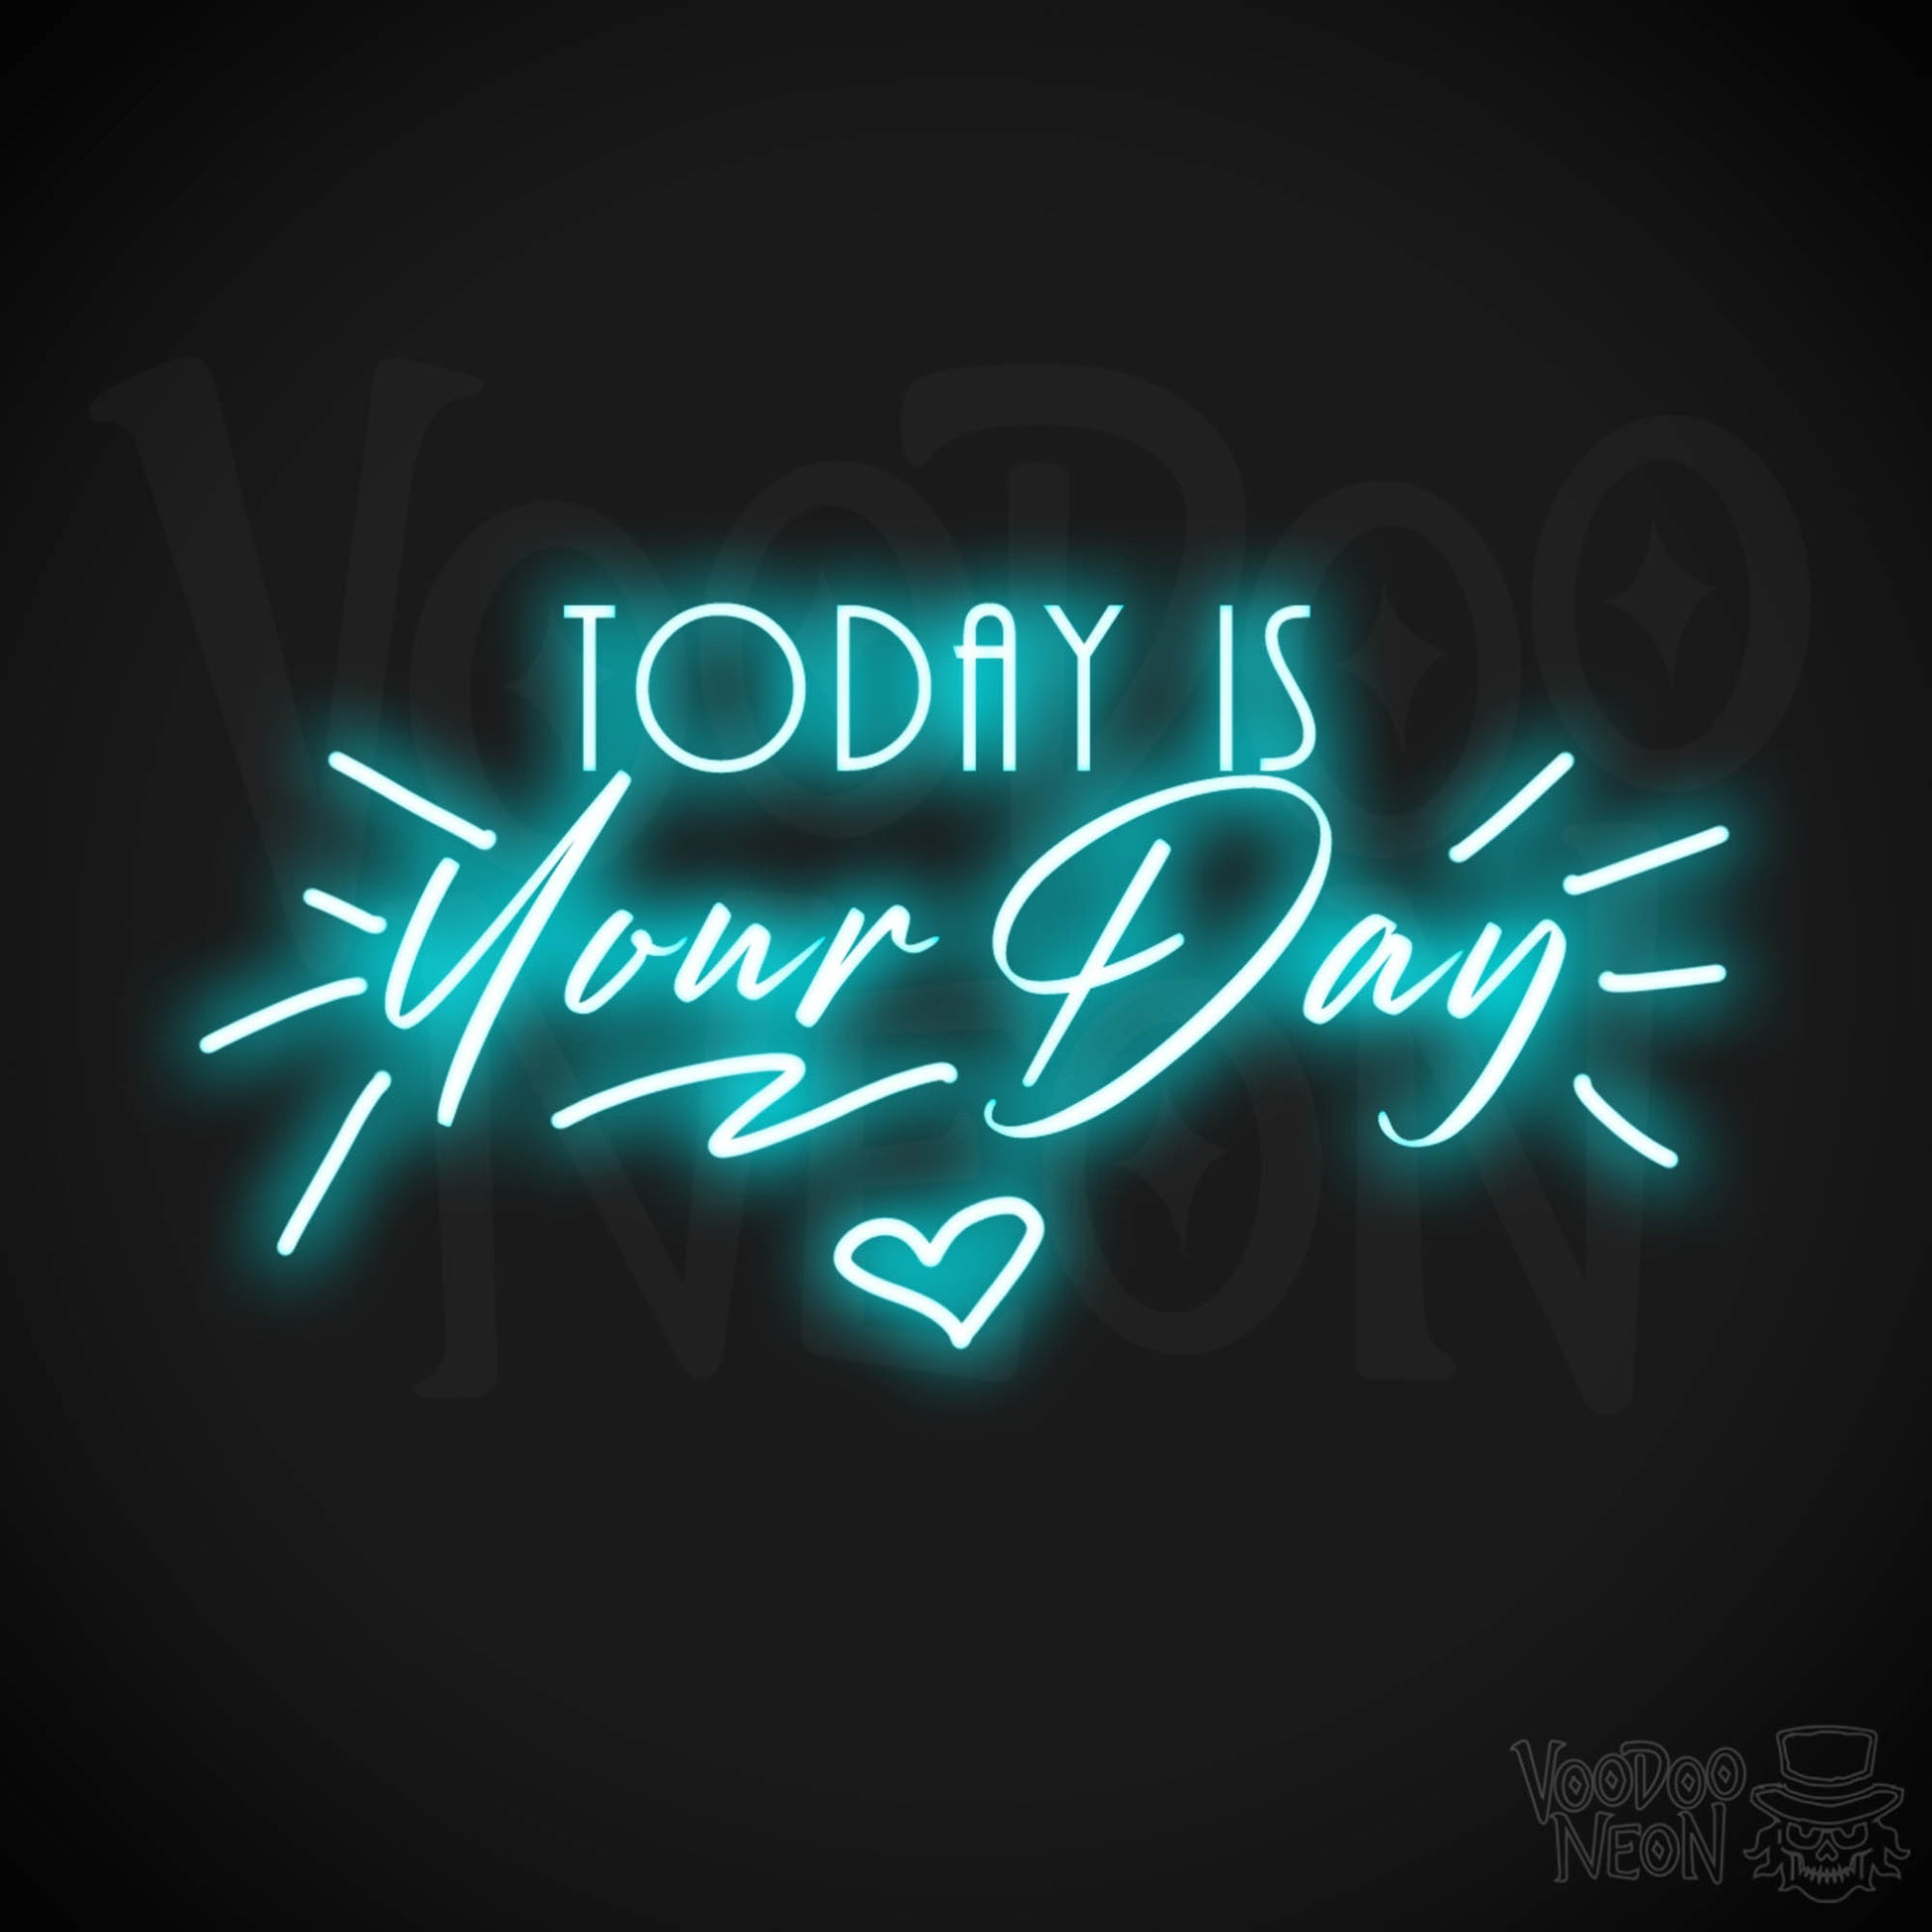 Today Is Your Day Neon Sign - Neon Today Is Your Day Sign - Wall Art - Color Ice Blue